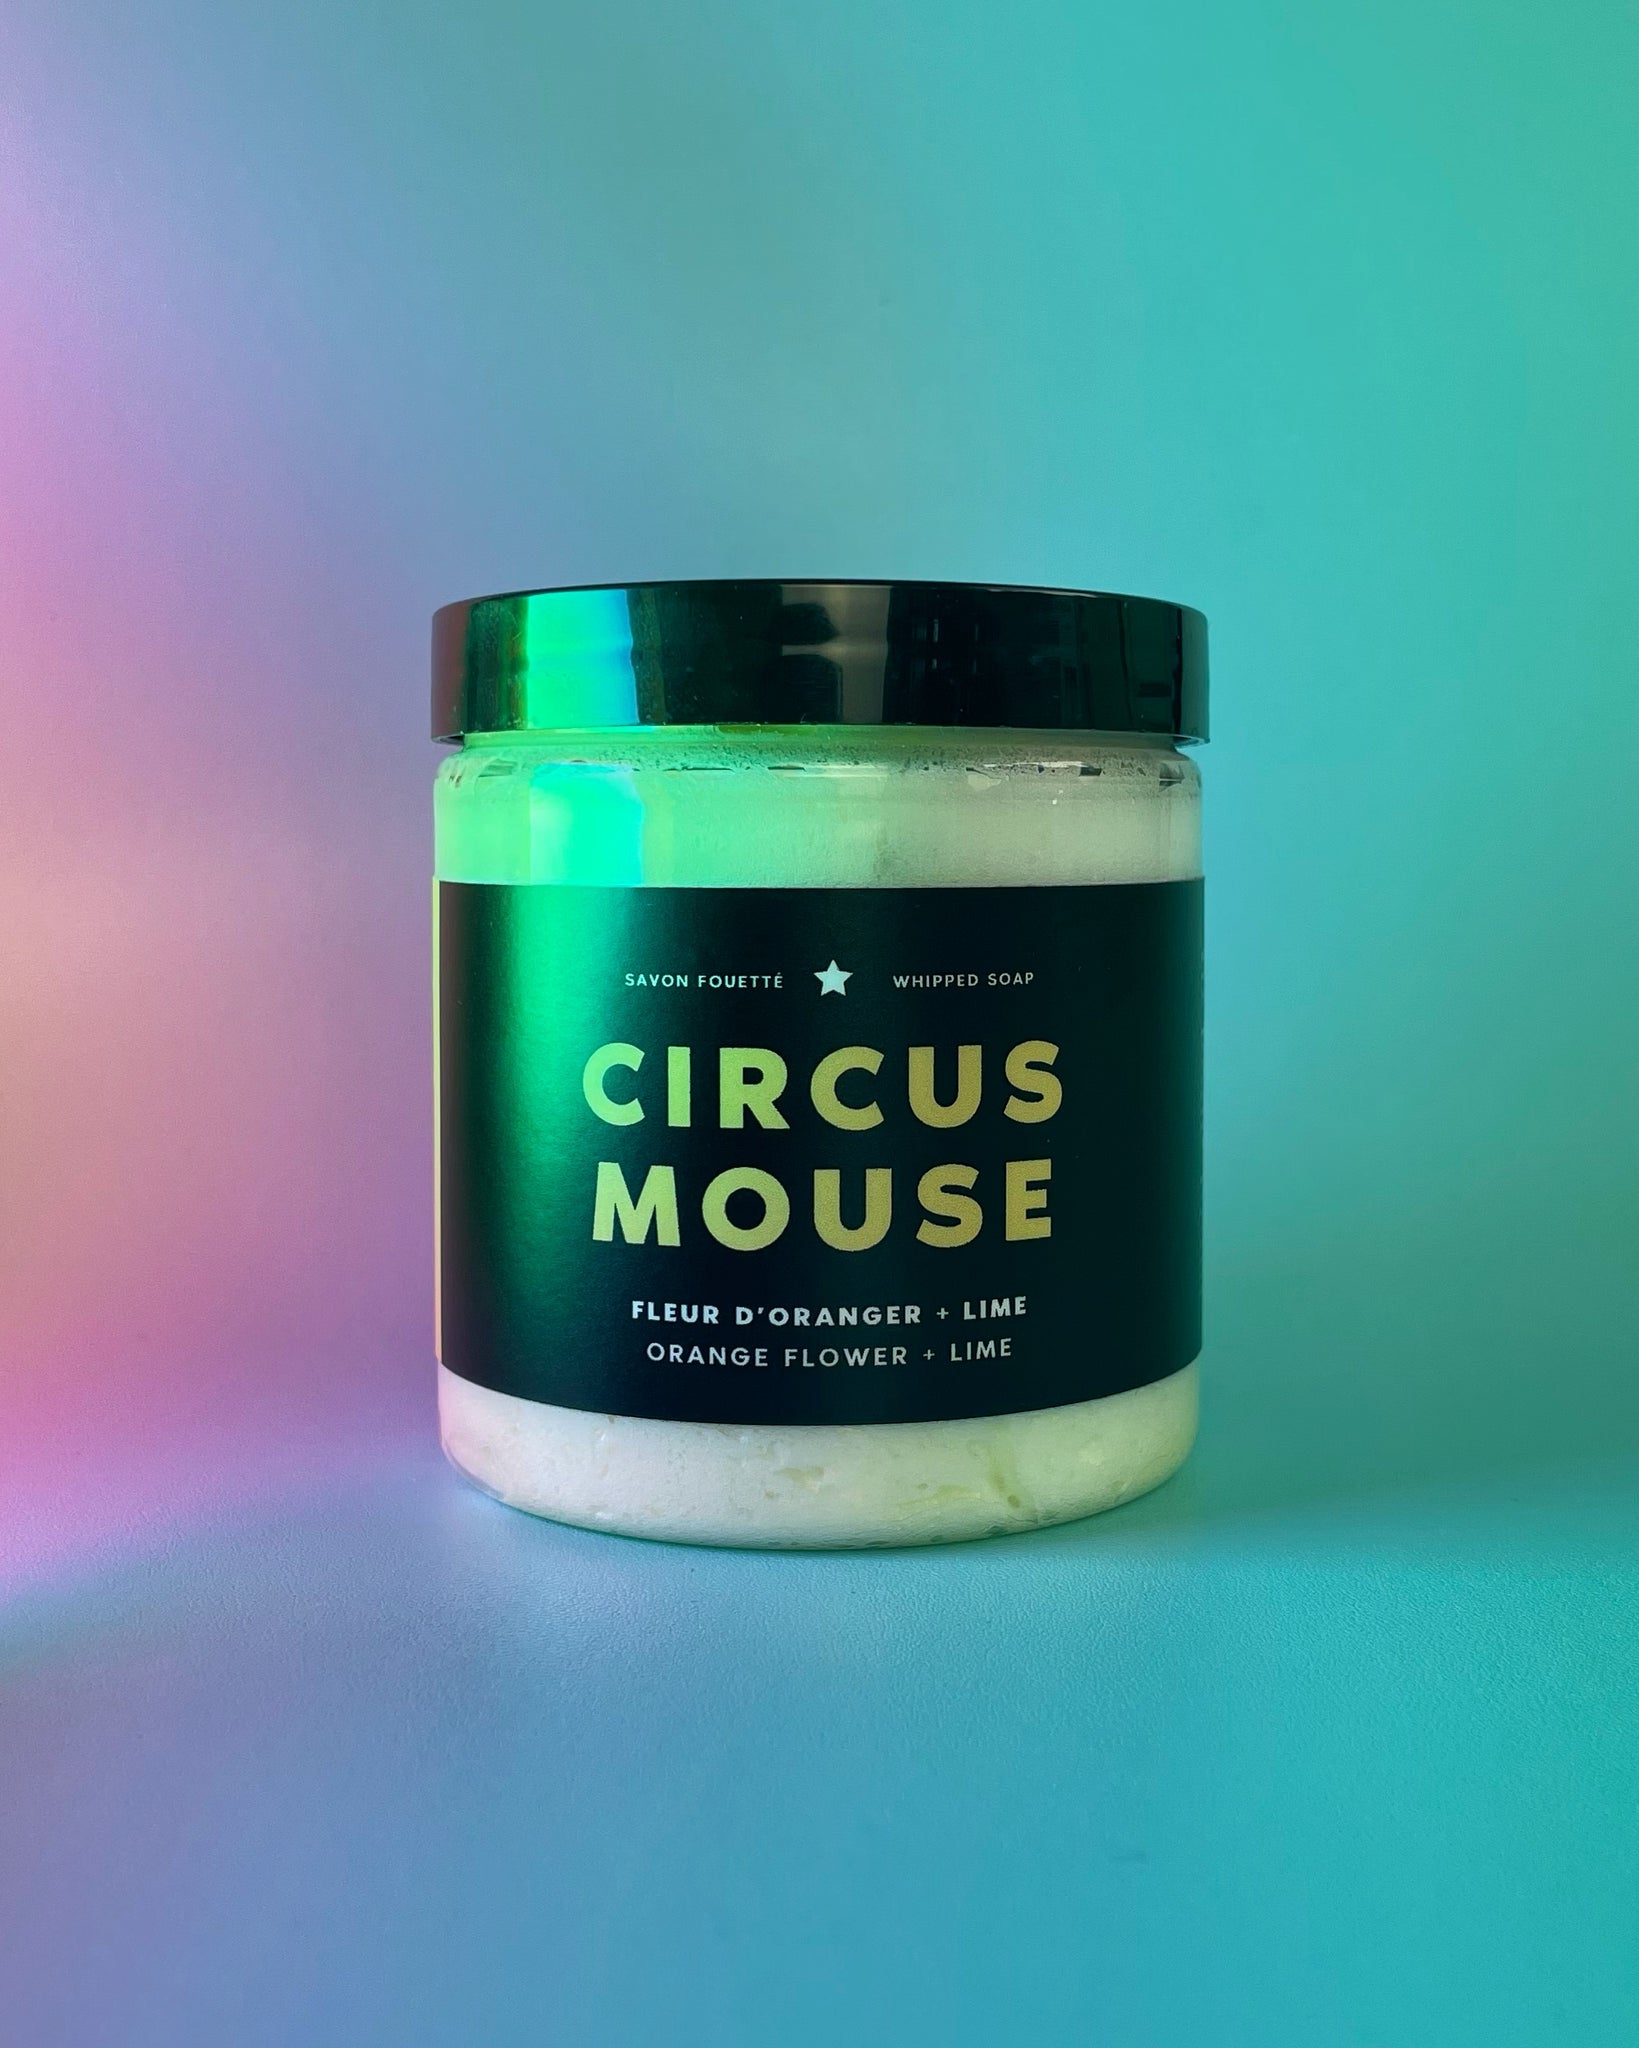 Circus Mouse Orange flower + Lime whipped soap